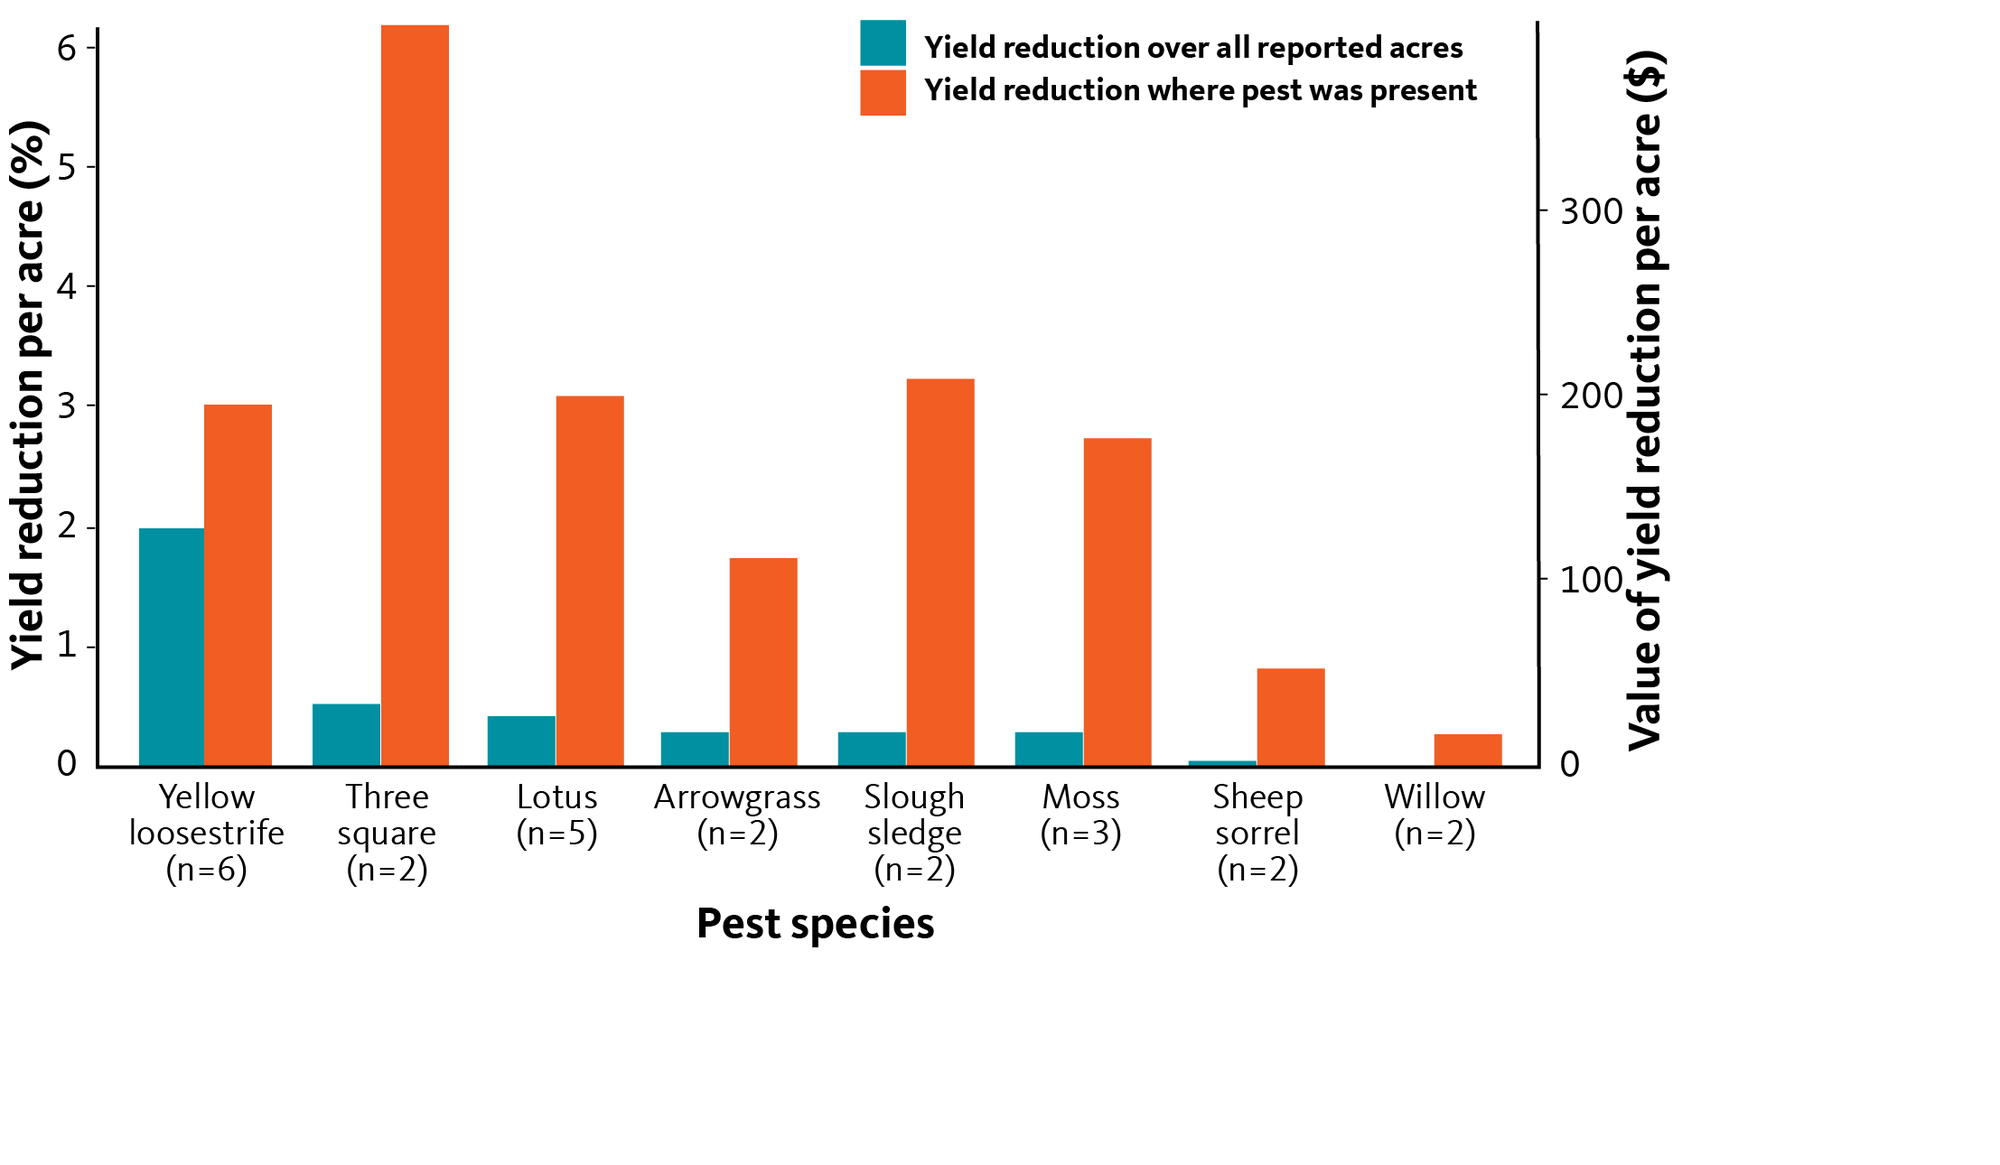 Bar chart showing yellow loosestrife and three square affecting yield